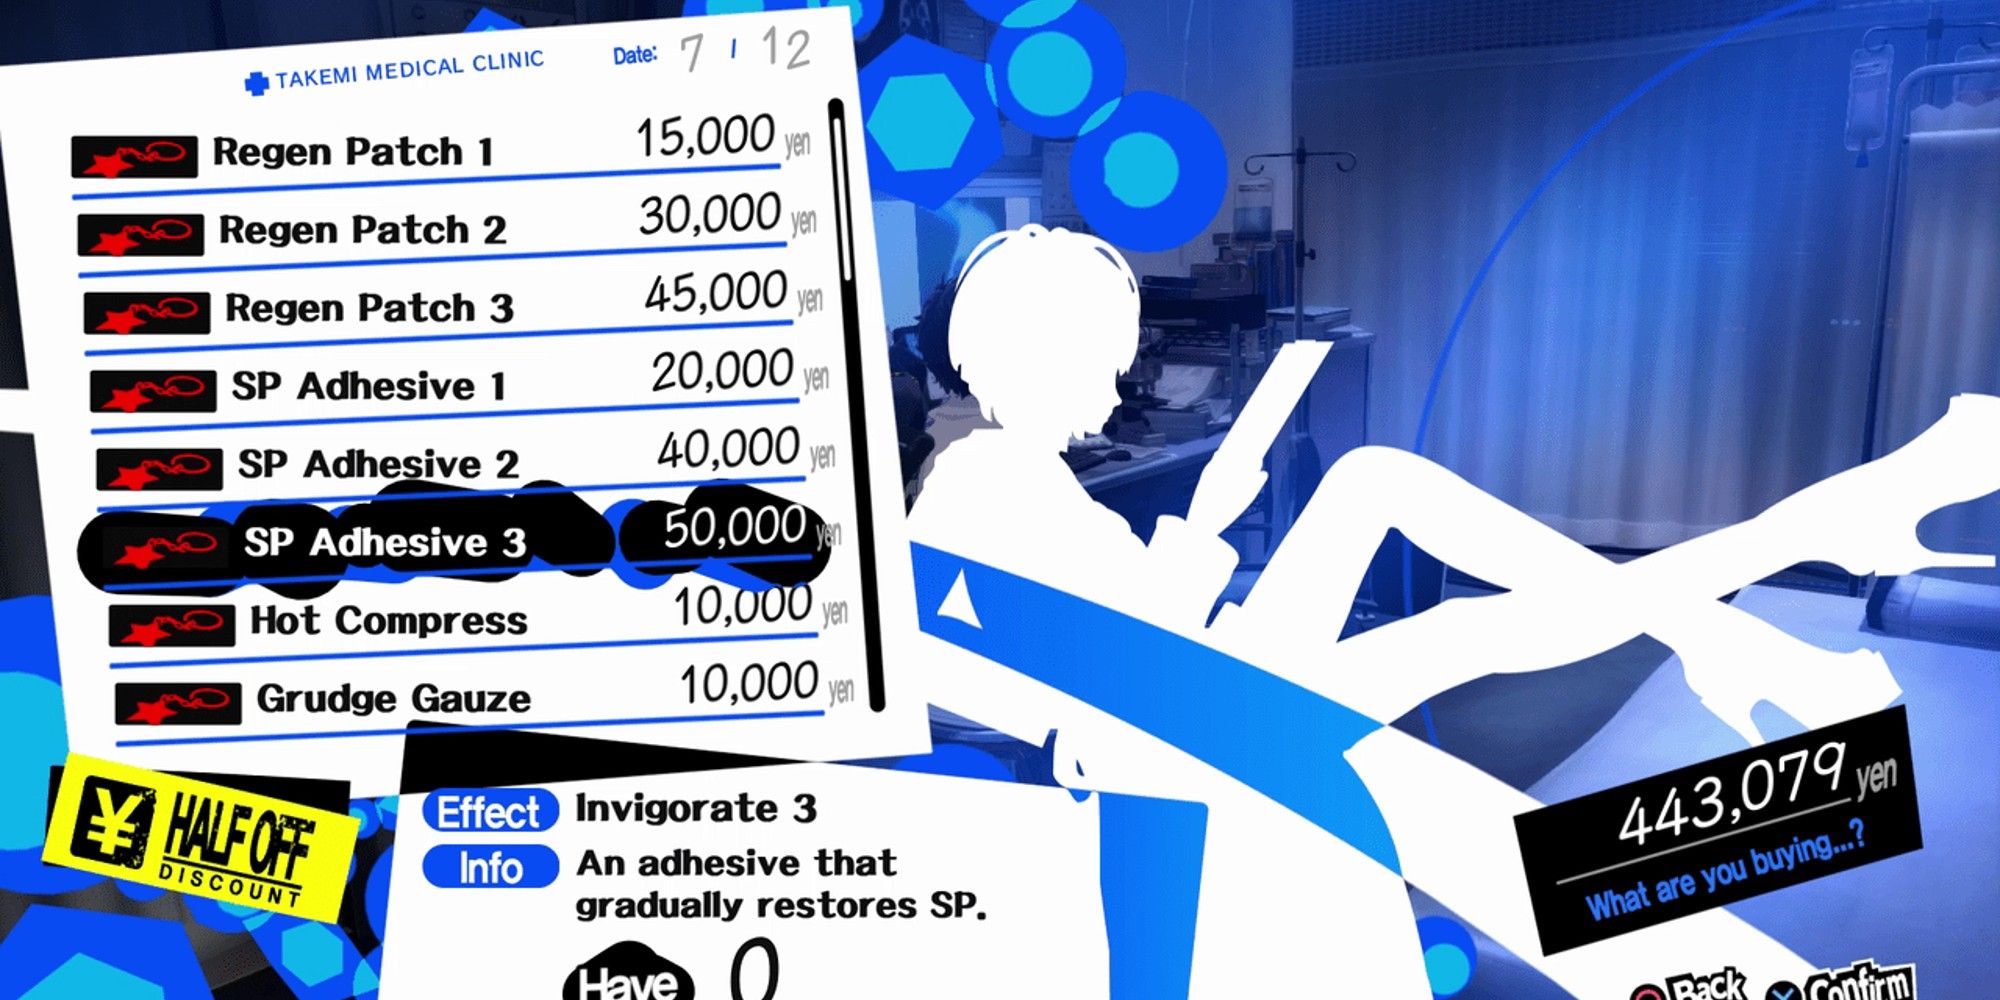 purchase menu from takemi's clinic shop in persona 5 royal